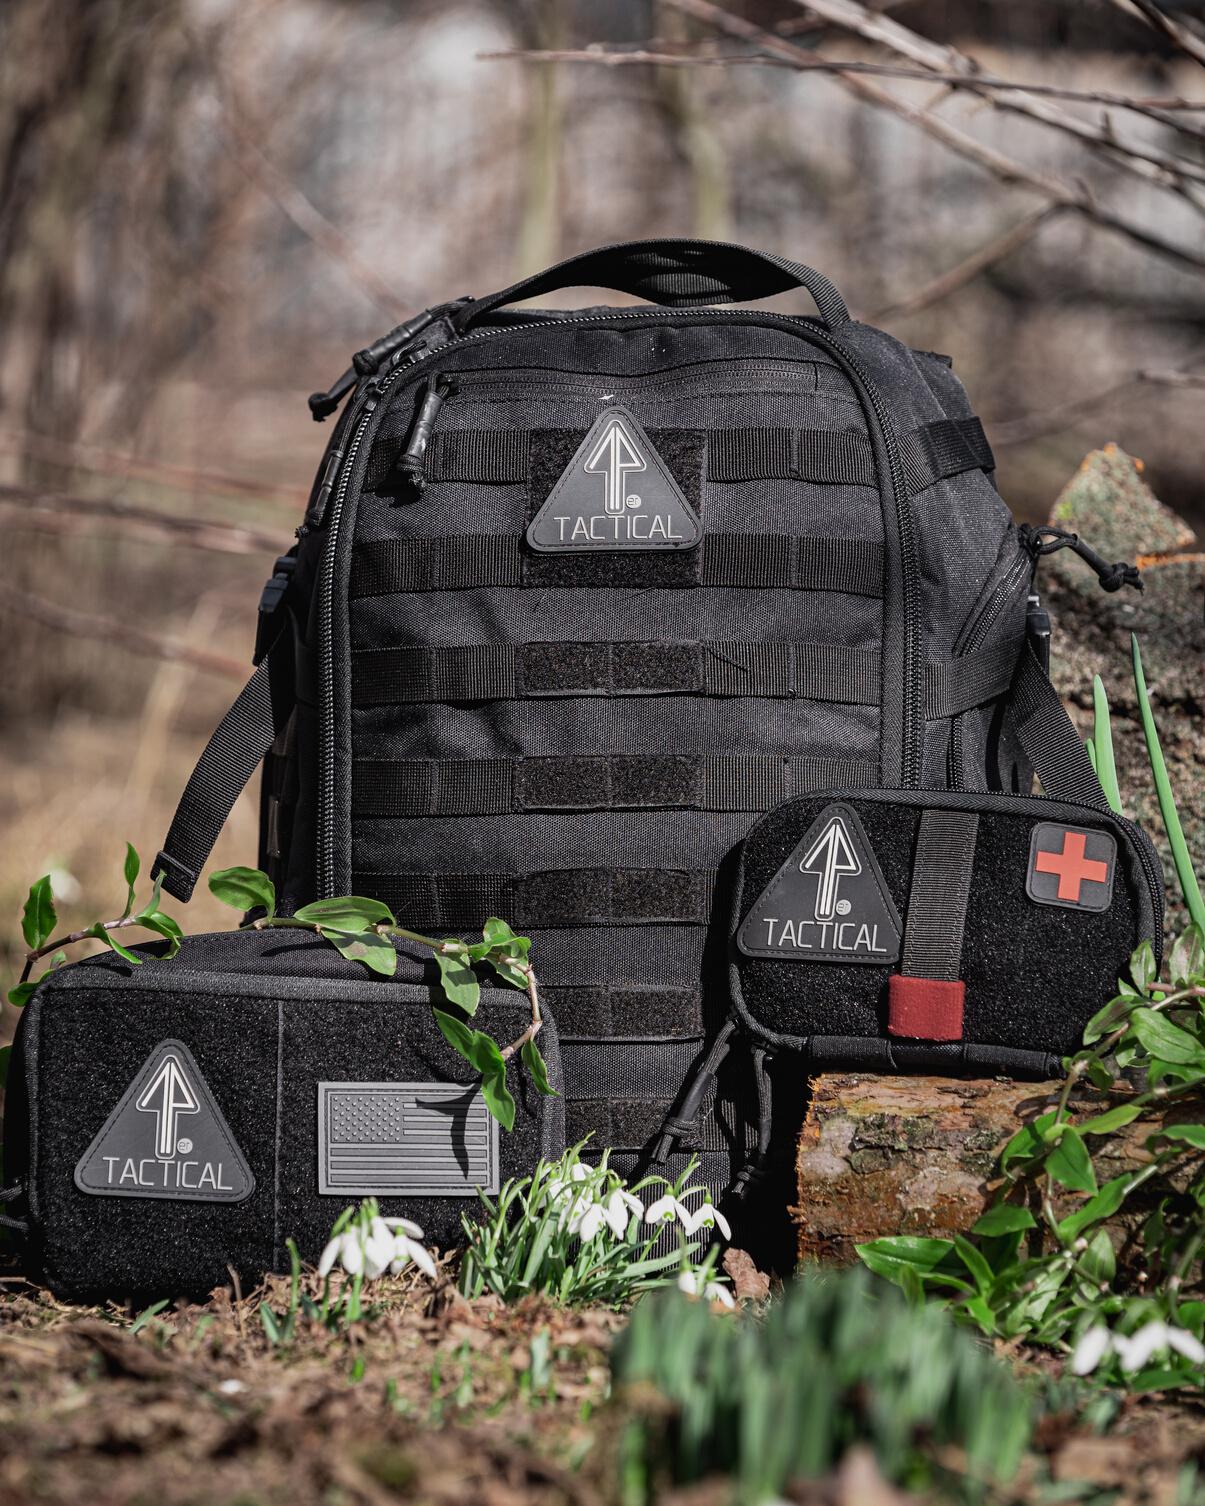 TACTICAL GEAR FOR CAMPING: WHAT DO YOU NEED?